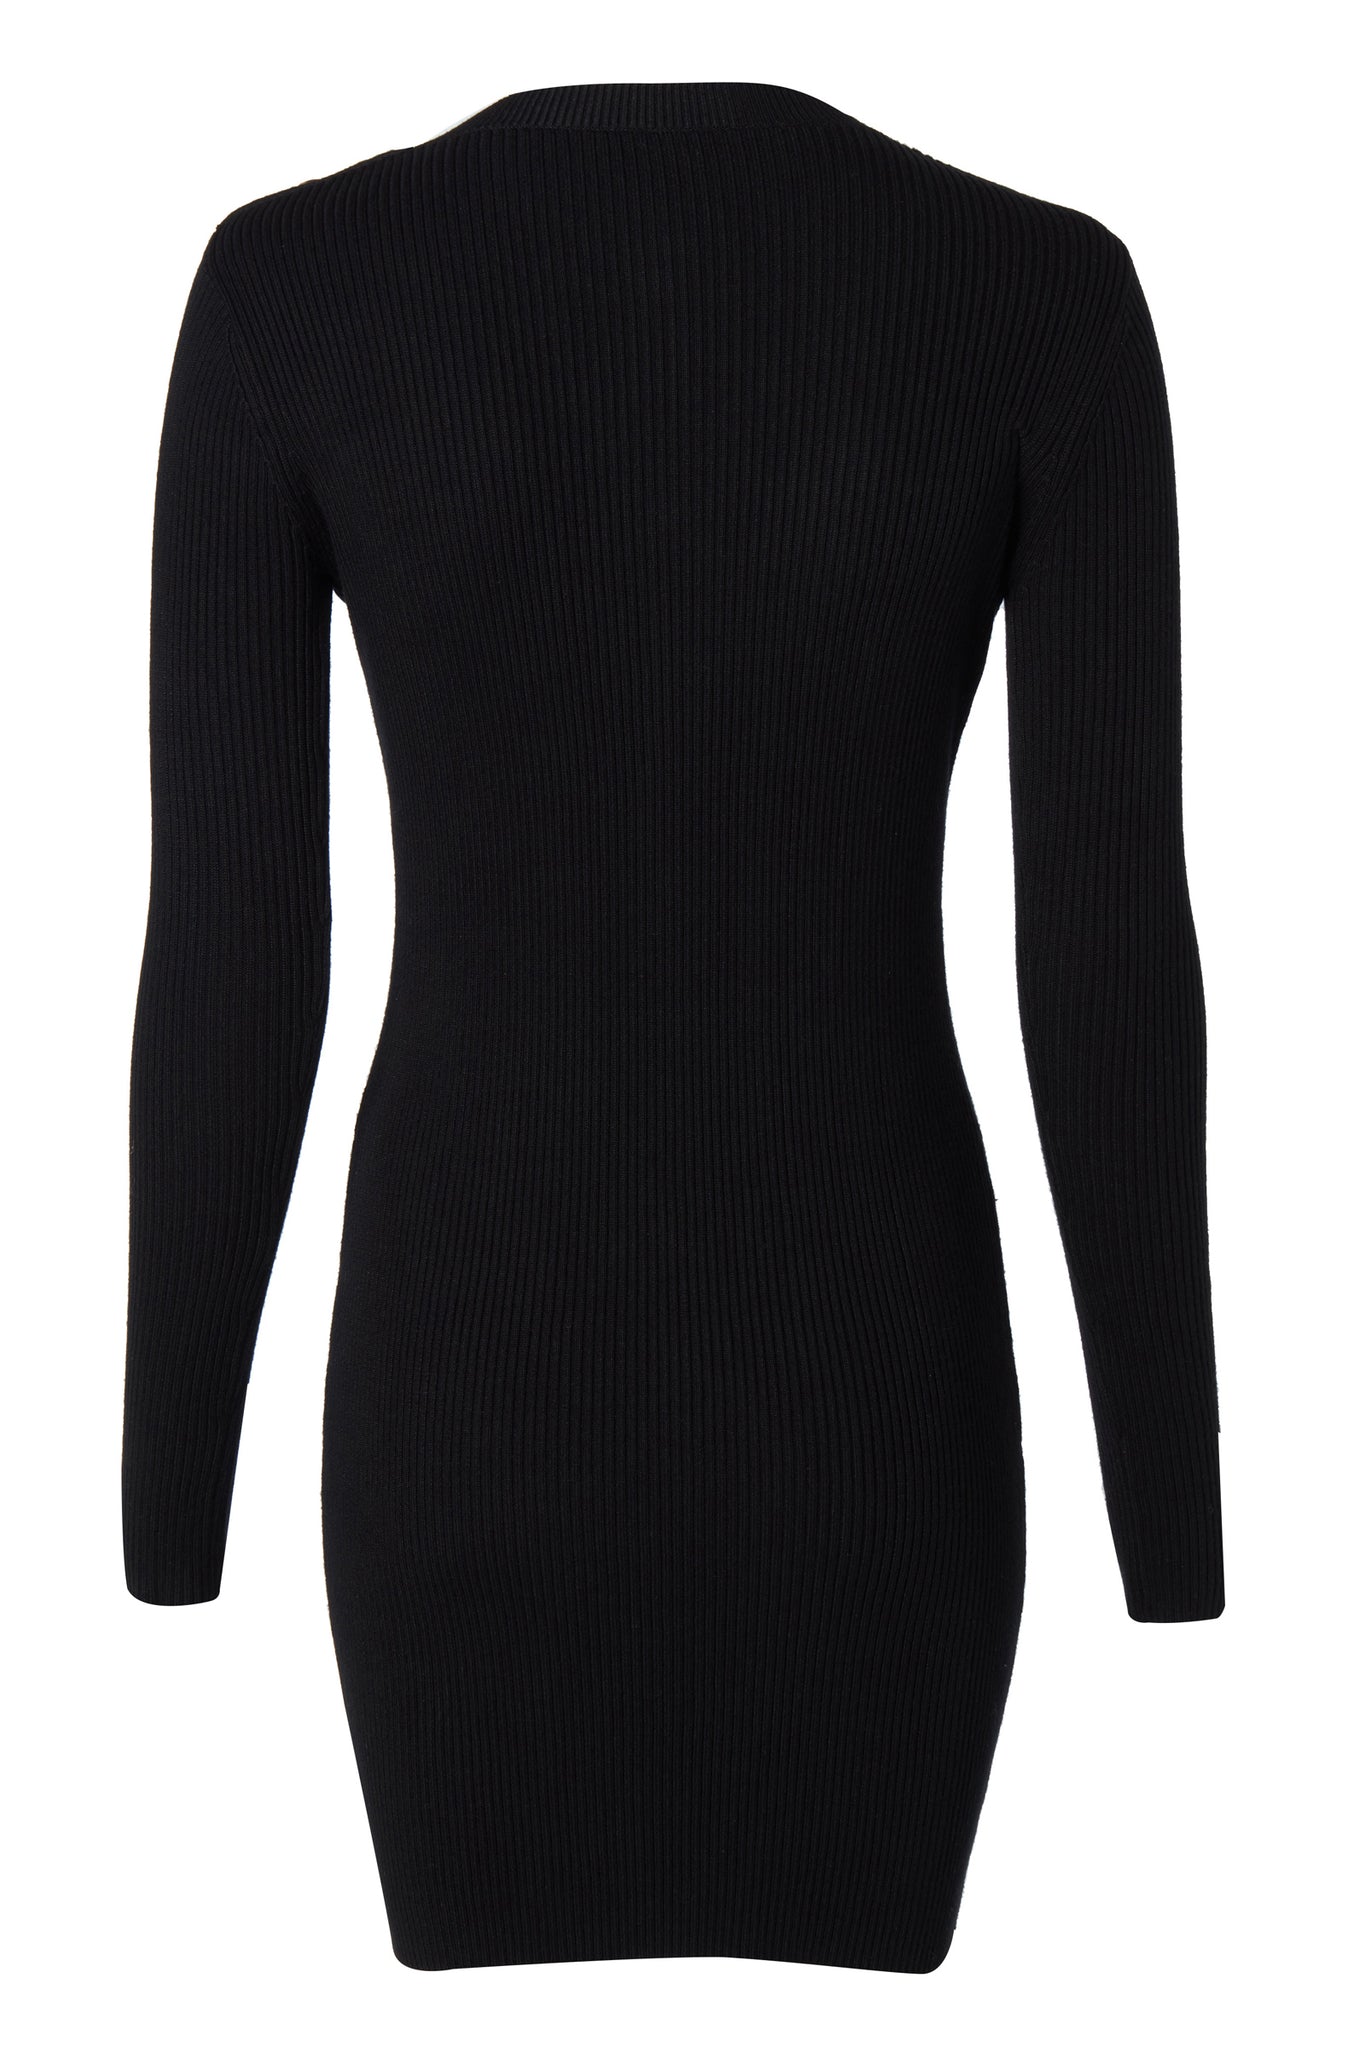 back womens slim fit crew neck long sleeve knitted dress in black with gold button detail down the centre front and two welt pockets on chest and two on the hips with gold buttons on the centre of each pocket